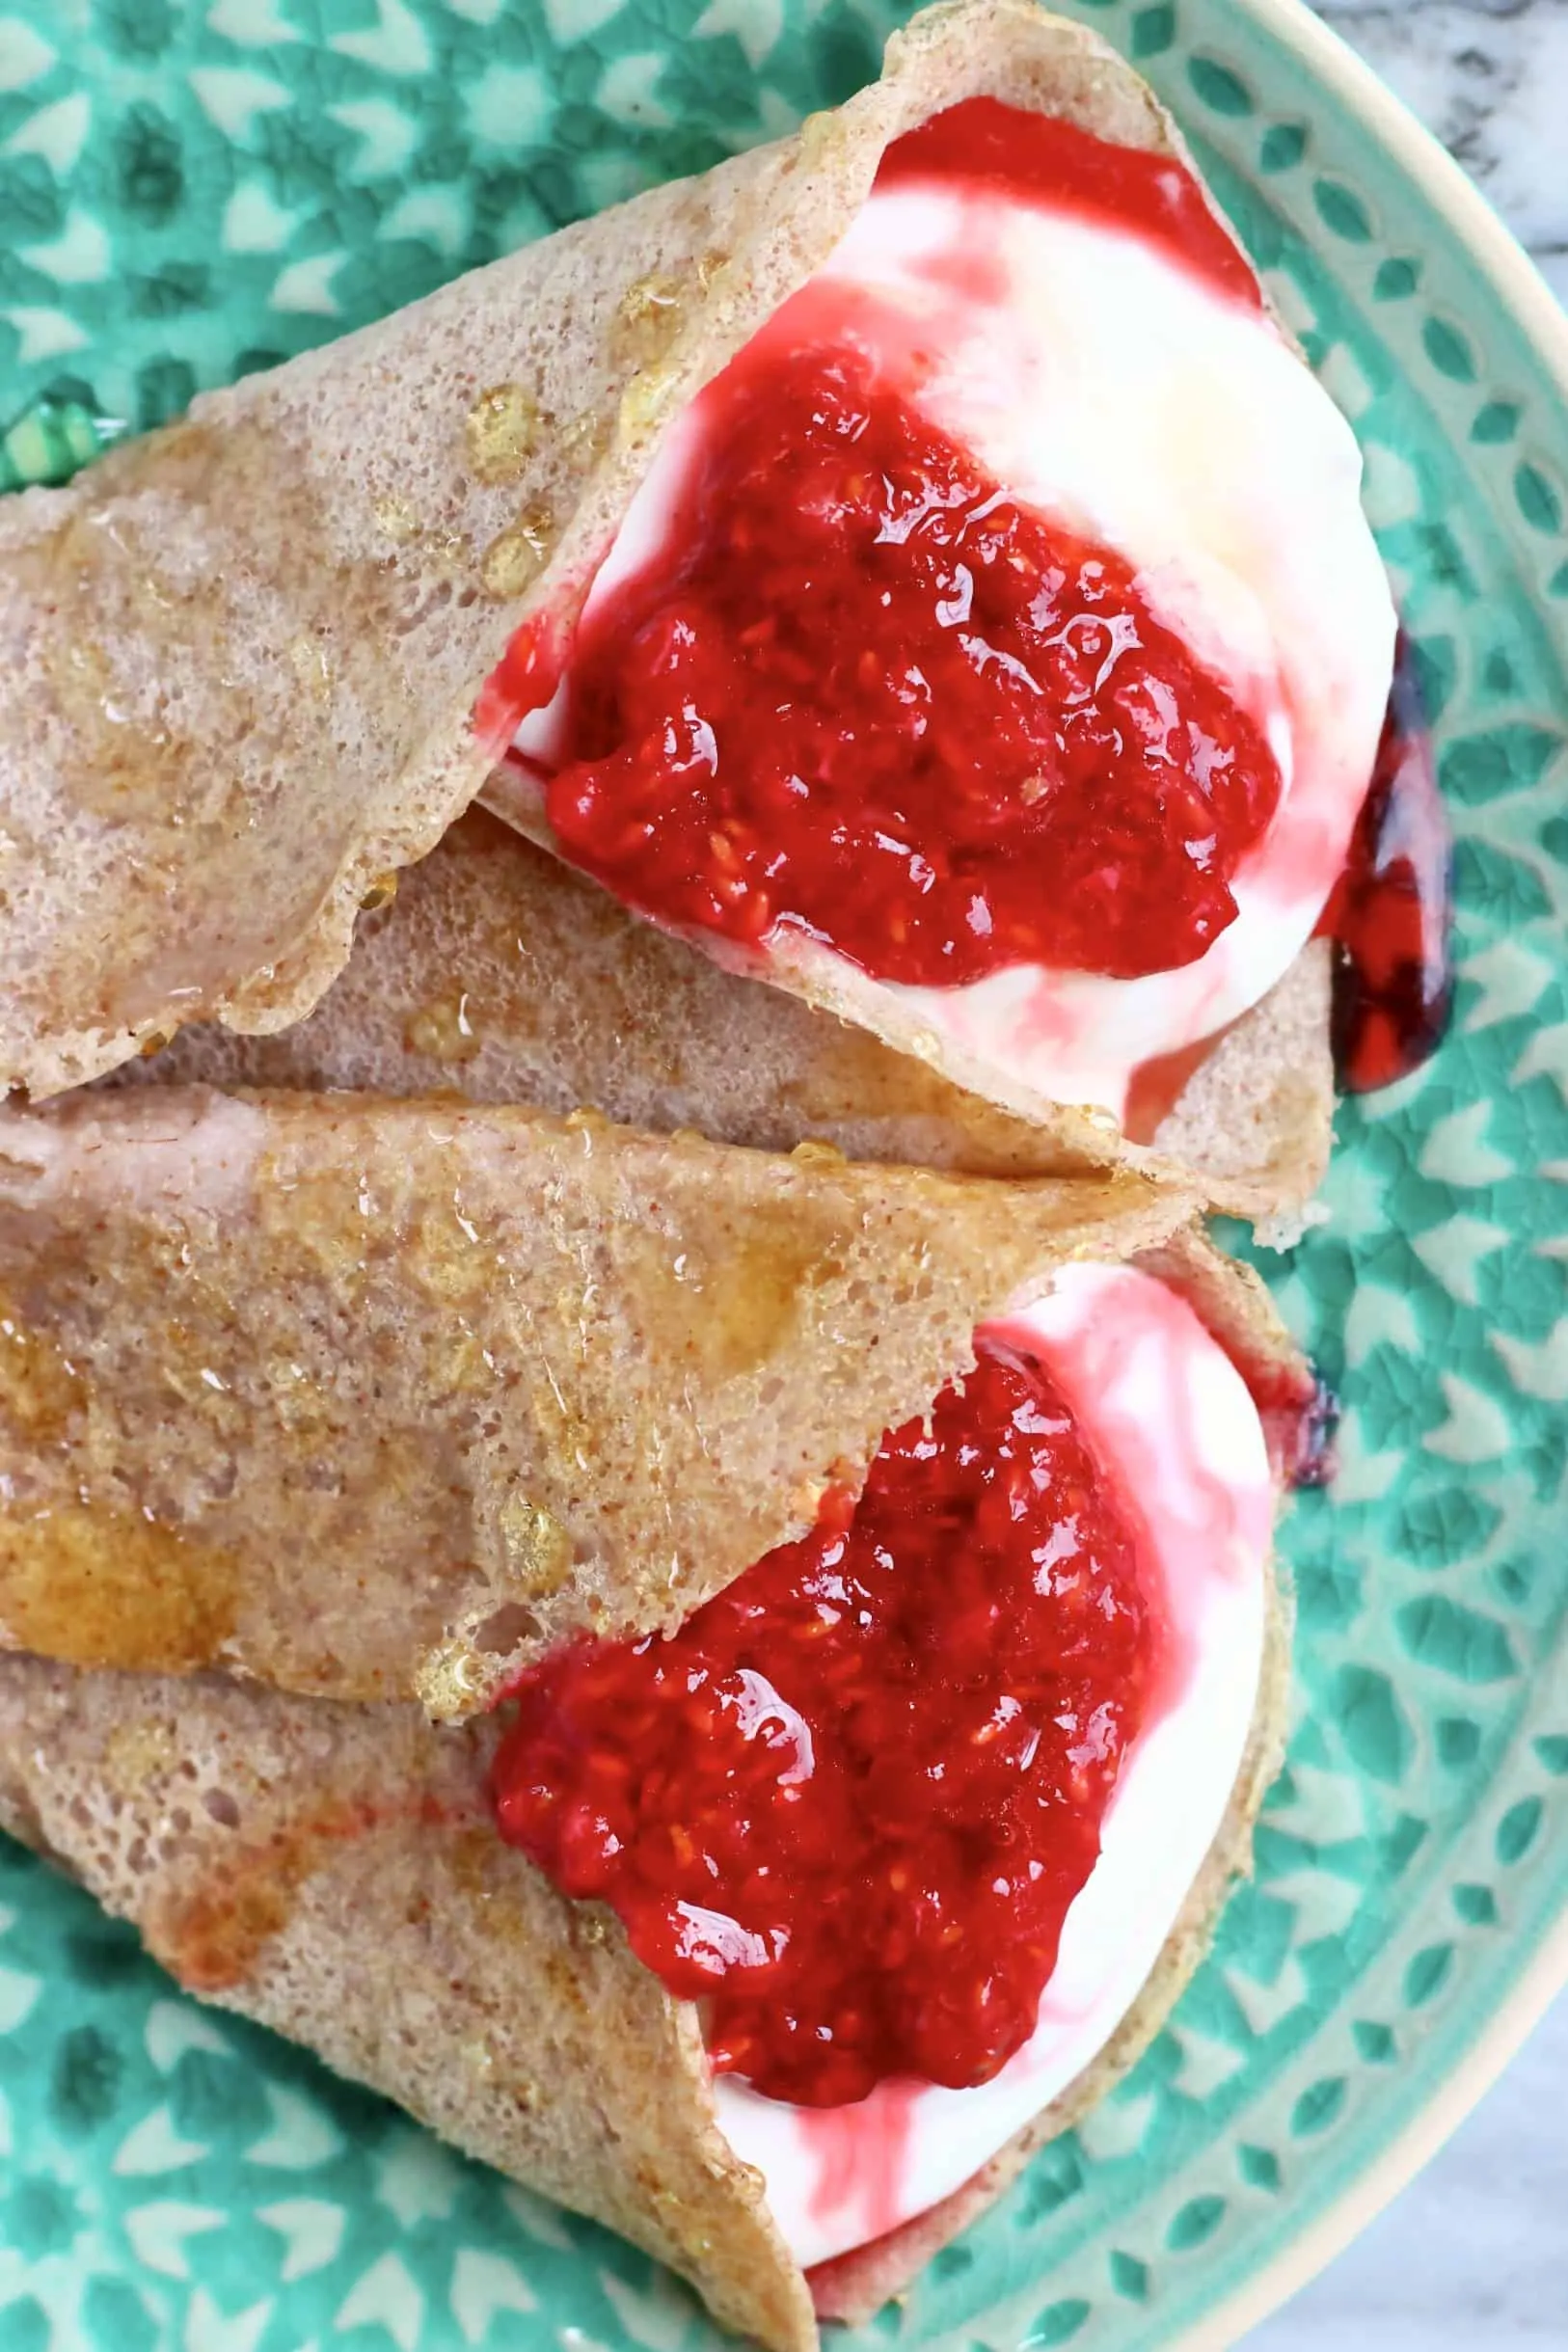 Two buckwheat crepes filled with whipped cream and jam on a green plate